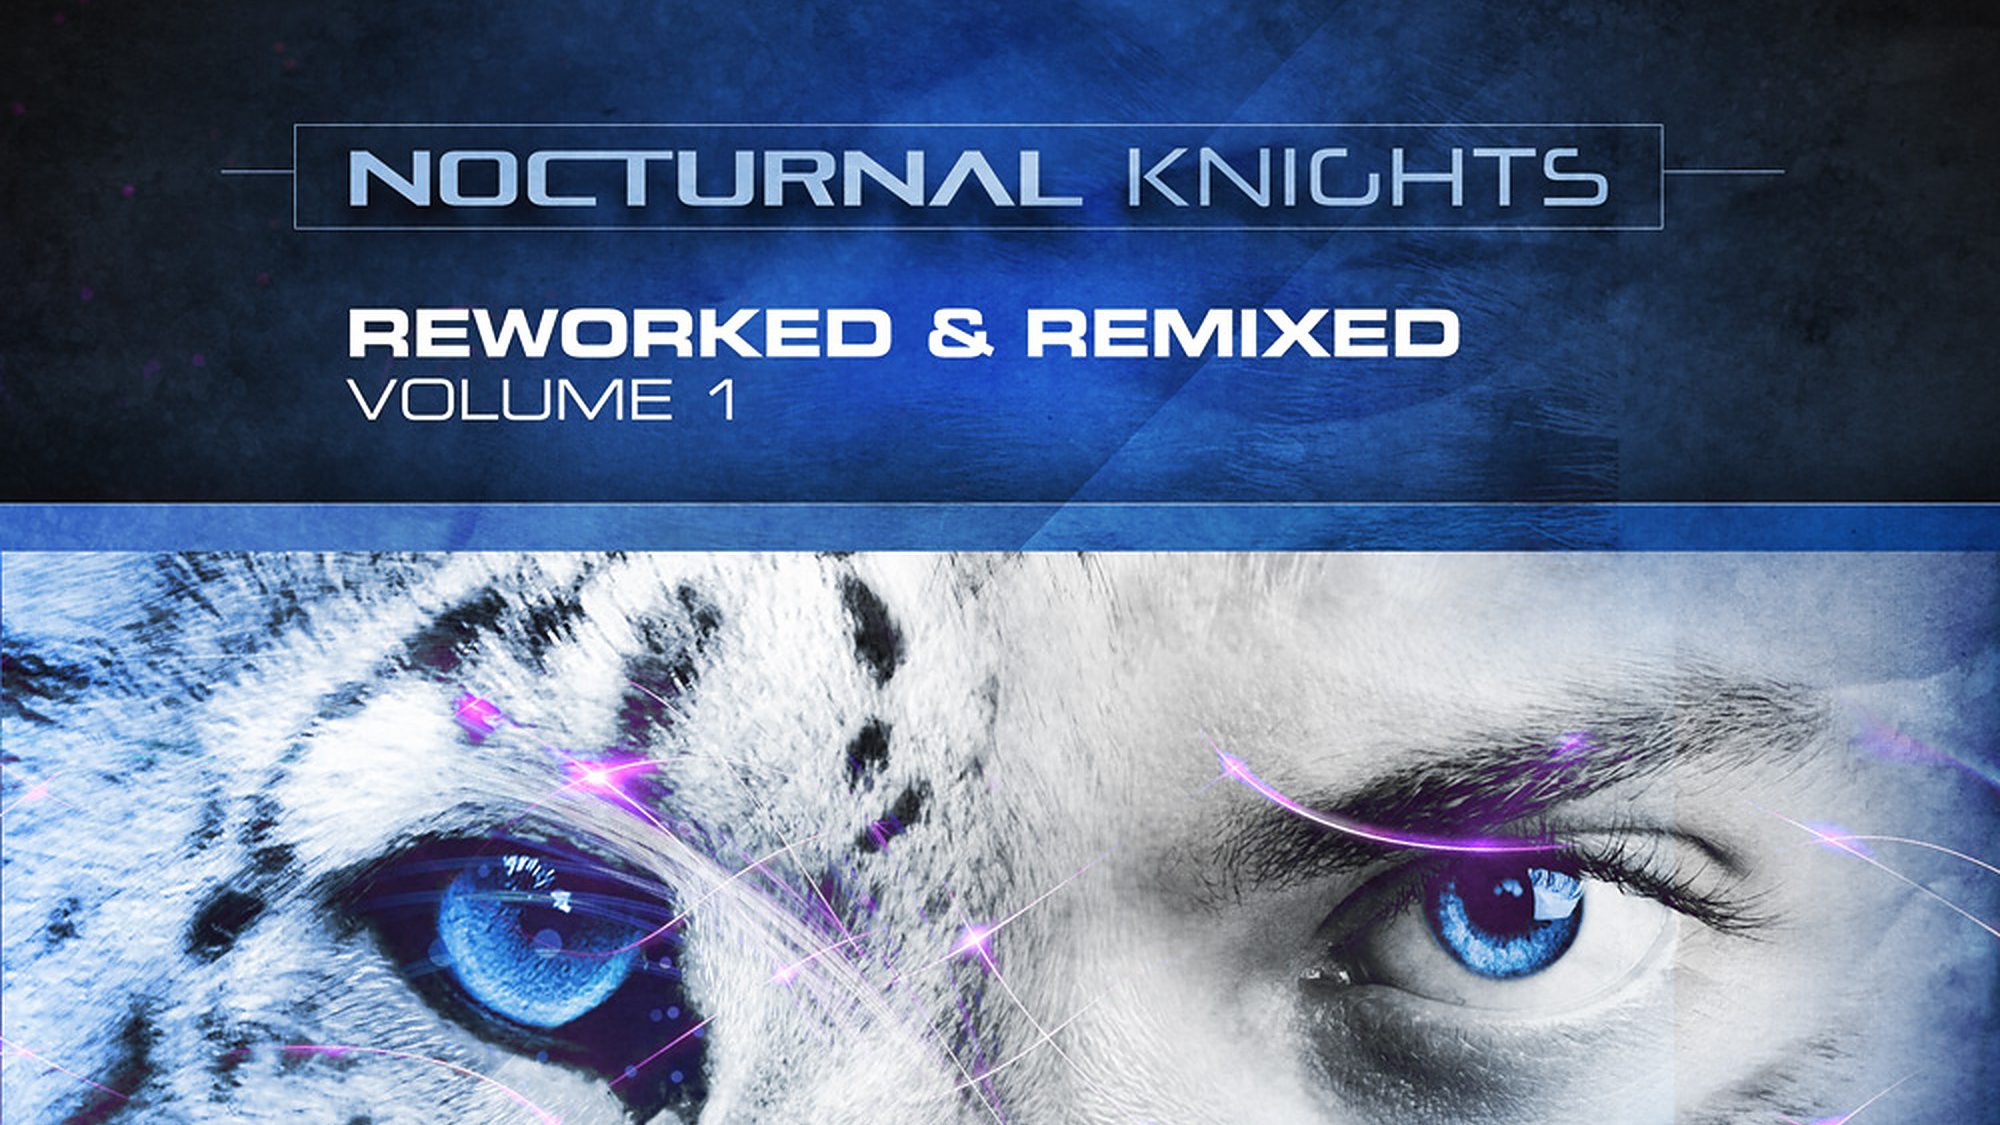 Nocturnal Knights Reworked & Remixed Vol. 1